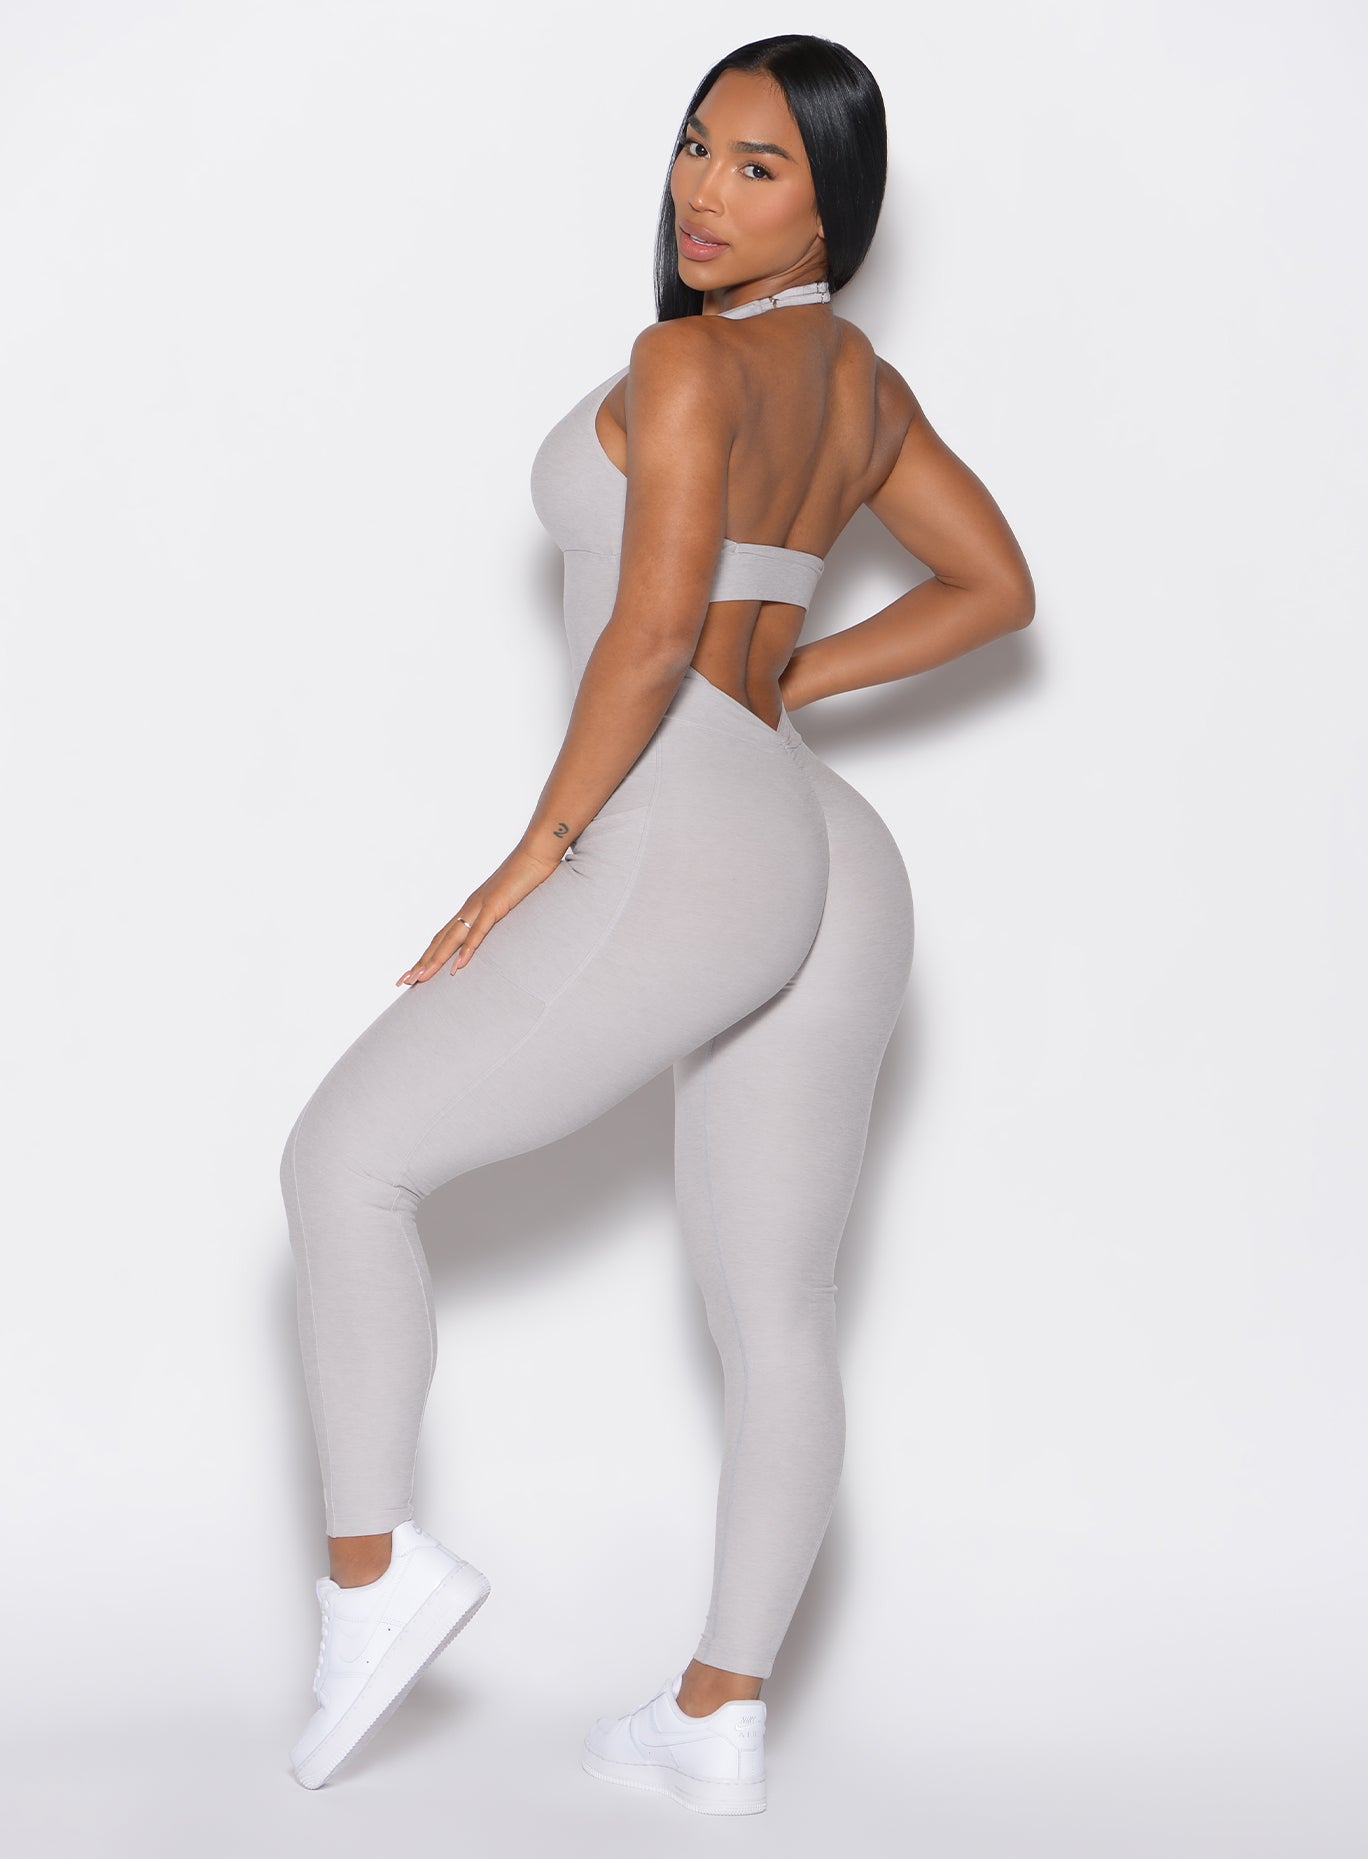 Left side profile view of a model wearing our Backless Pocket Bodysuit in ice color